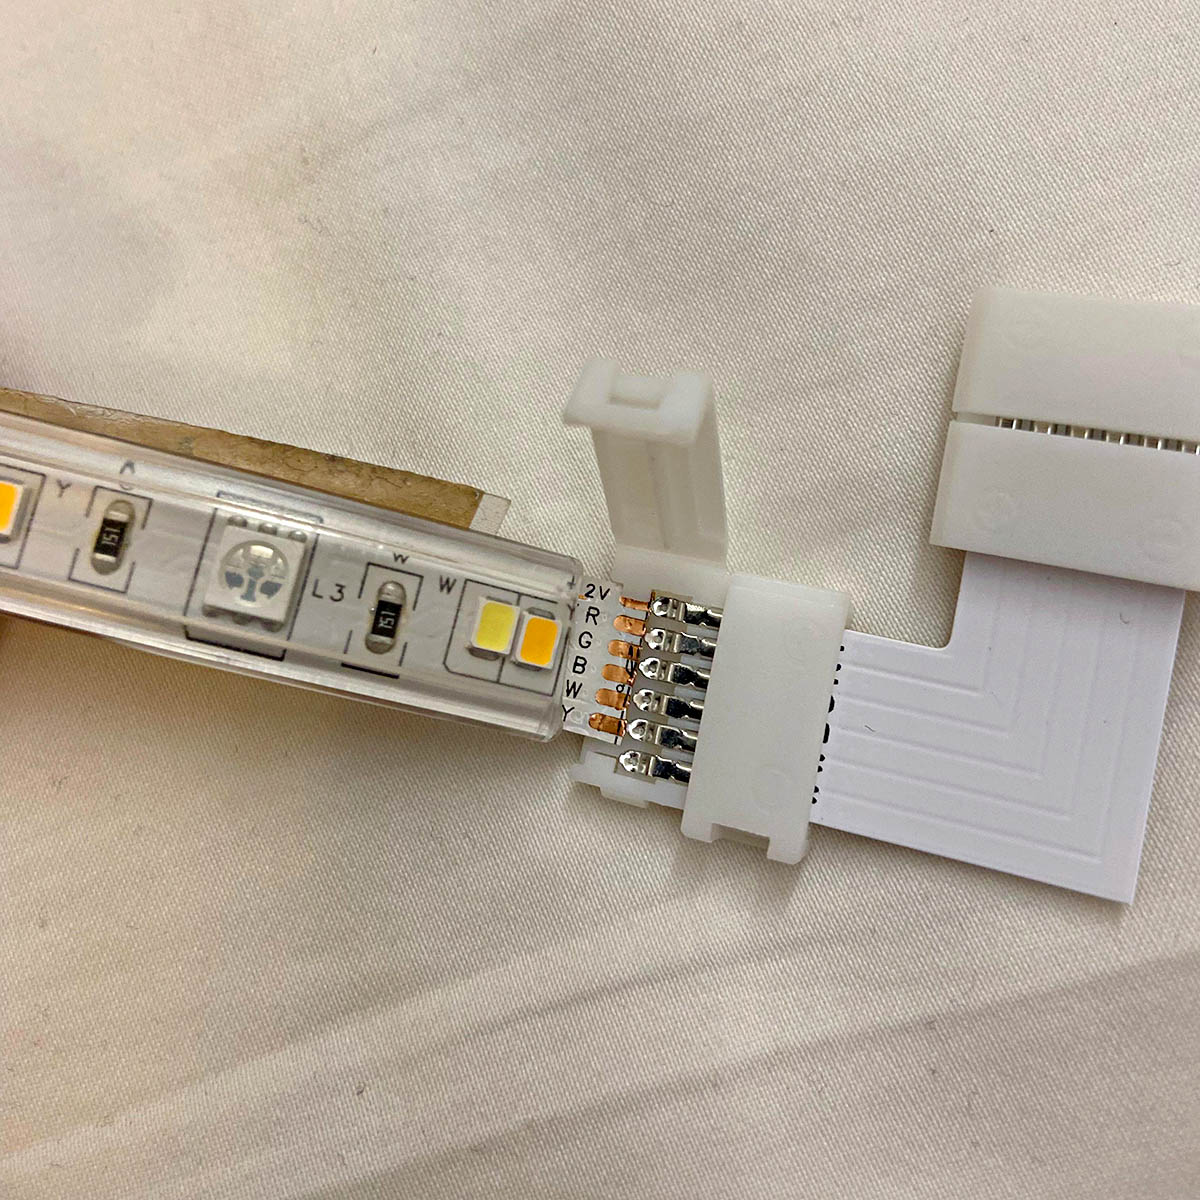 How To Connect Cut LED Strips